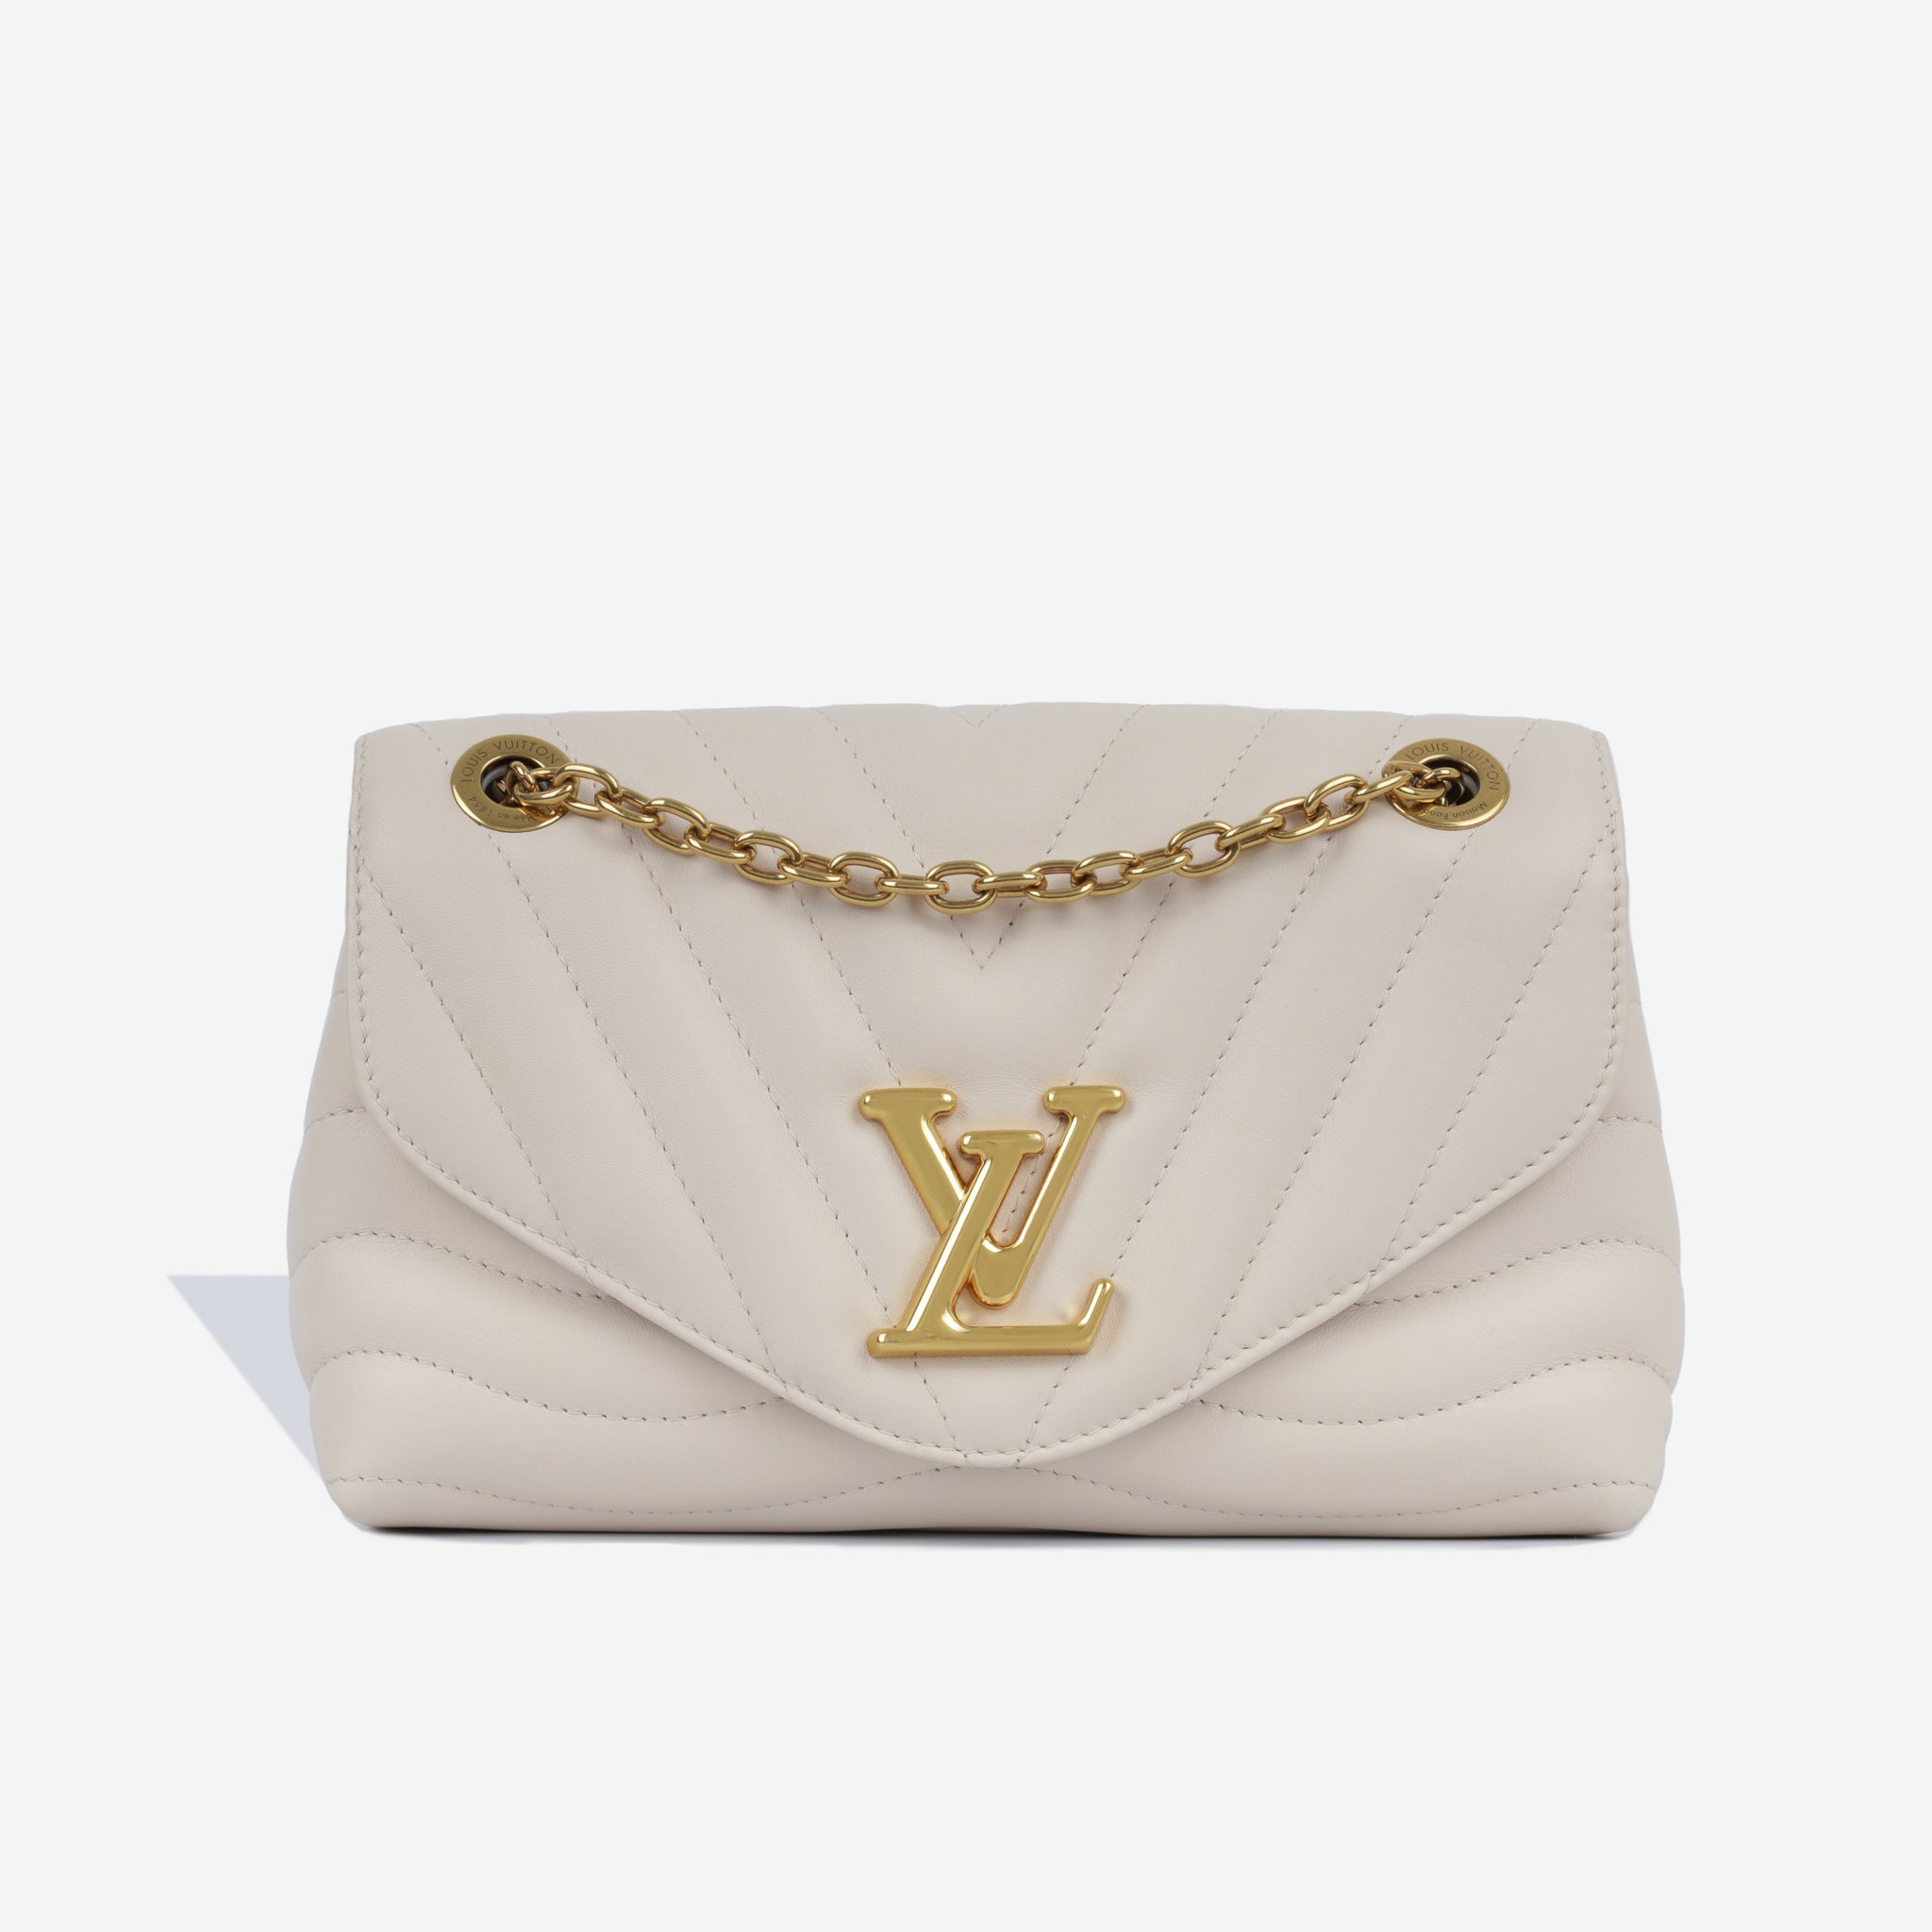 LOUIS VUITTON: LV NEW WAVE CHAIN BAG (SIZE MM) - REVIEW AND 1 YEAR HANDBAG  UPDATE 